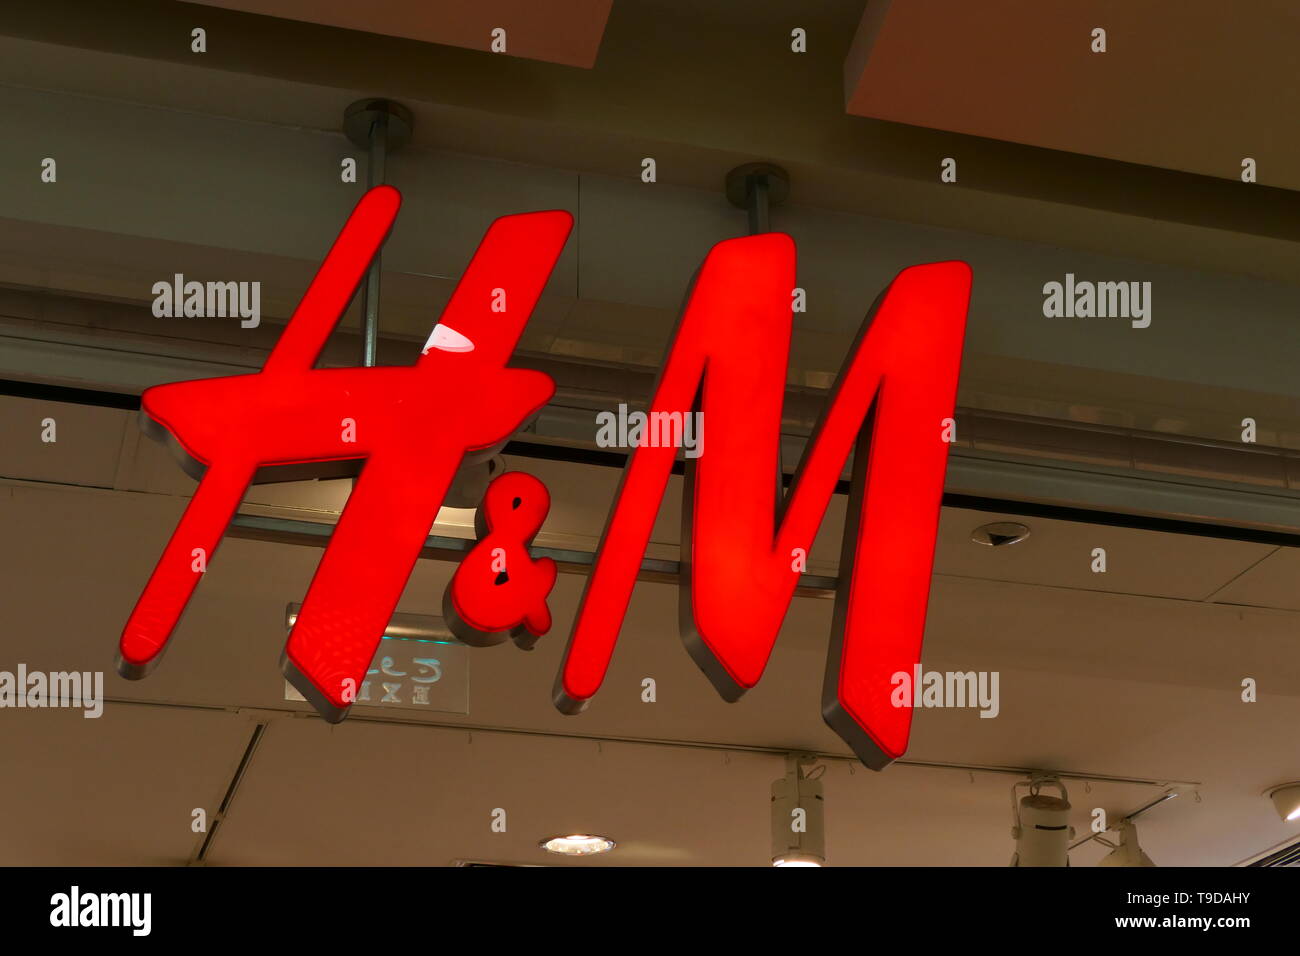 H&M Brand Logo Seen In Tsim Sha Tsui Hong Kong Stock Photo, Picture and  Royalty Free Image. Image 123680664.